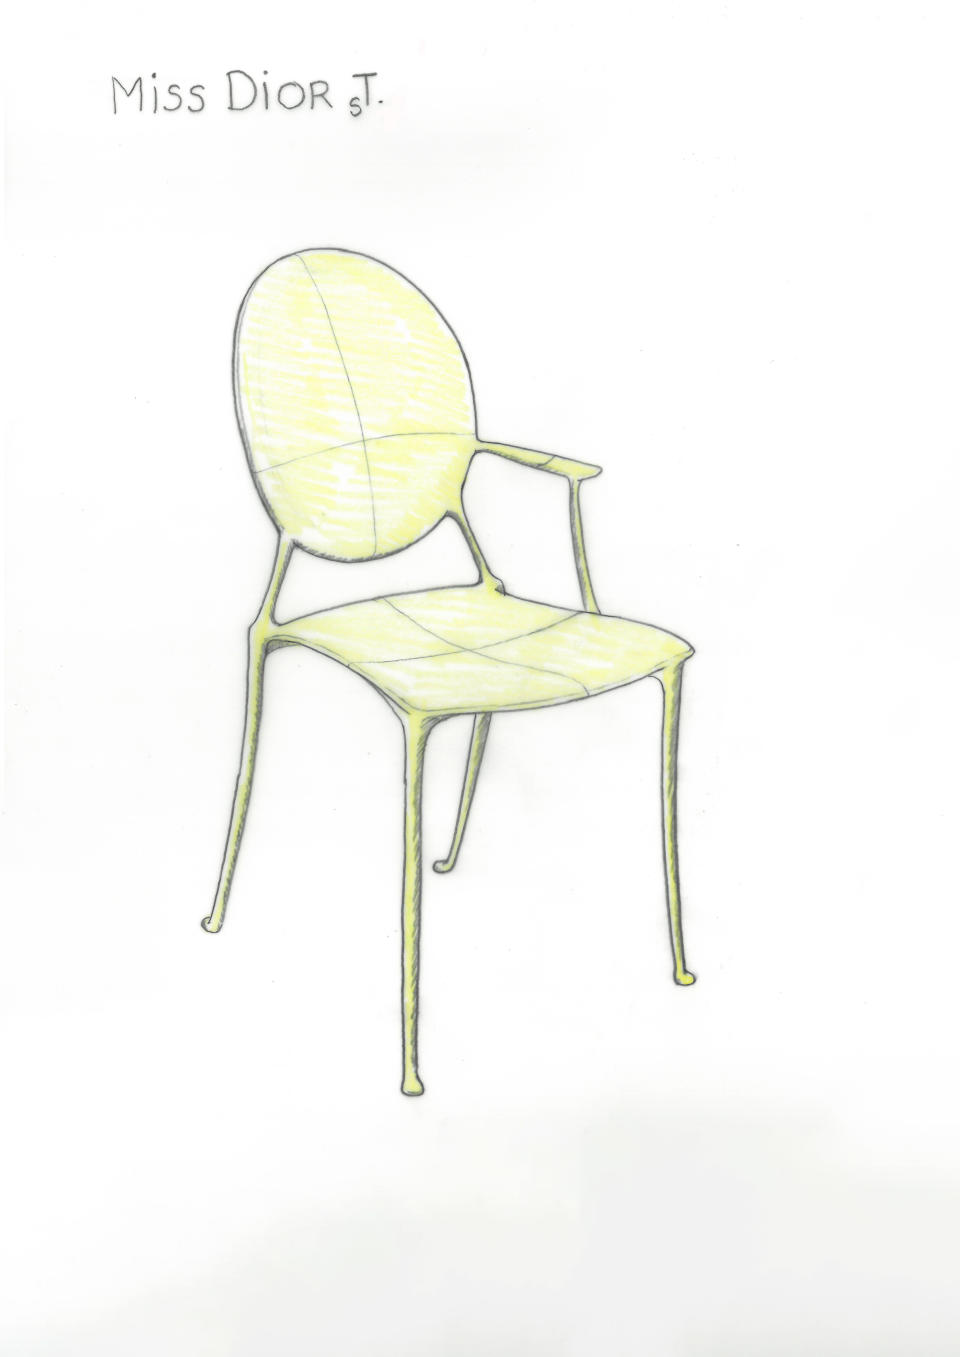 Philippe Starck’s sketch for the Miss Dior chair. - Credit: Courtesy of Dior